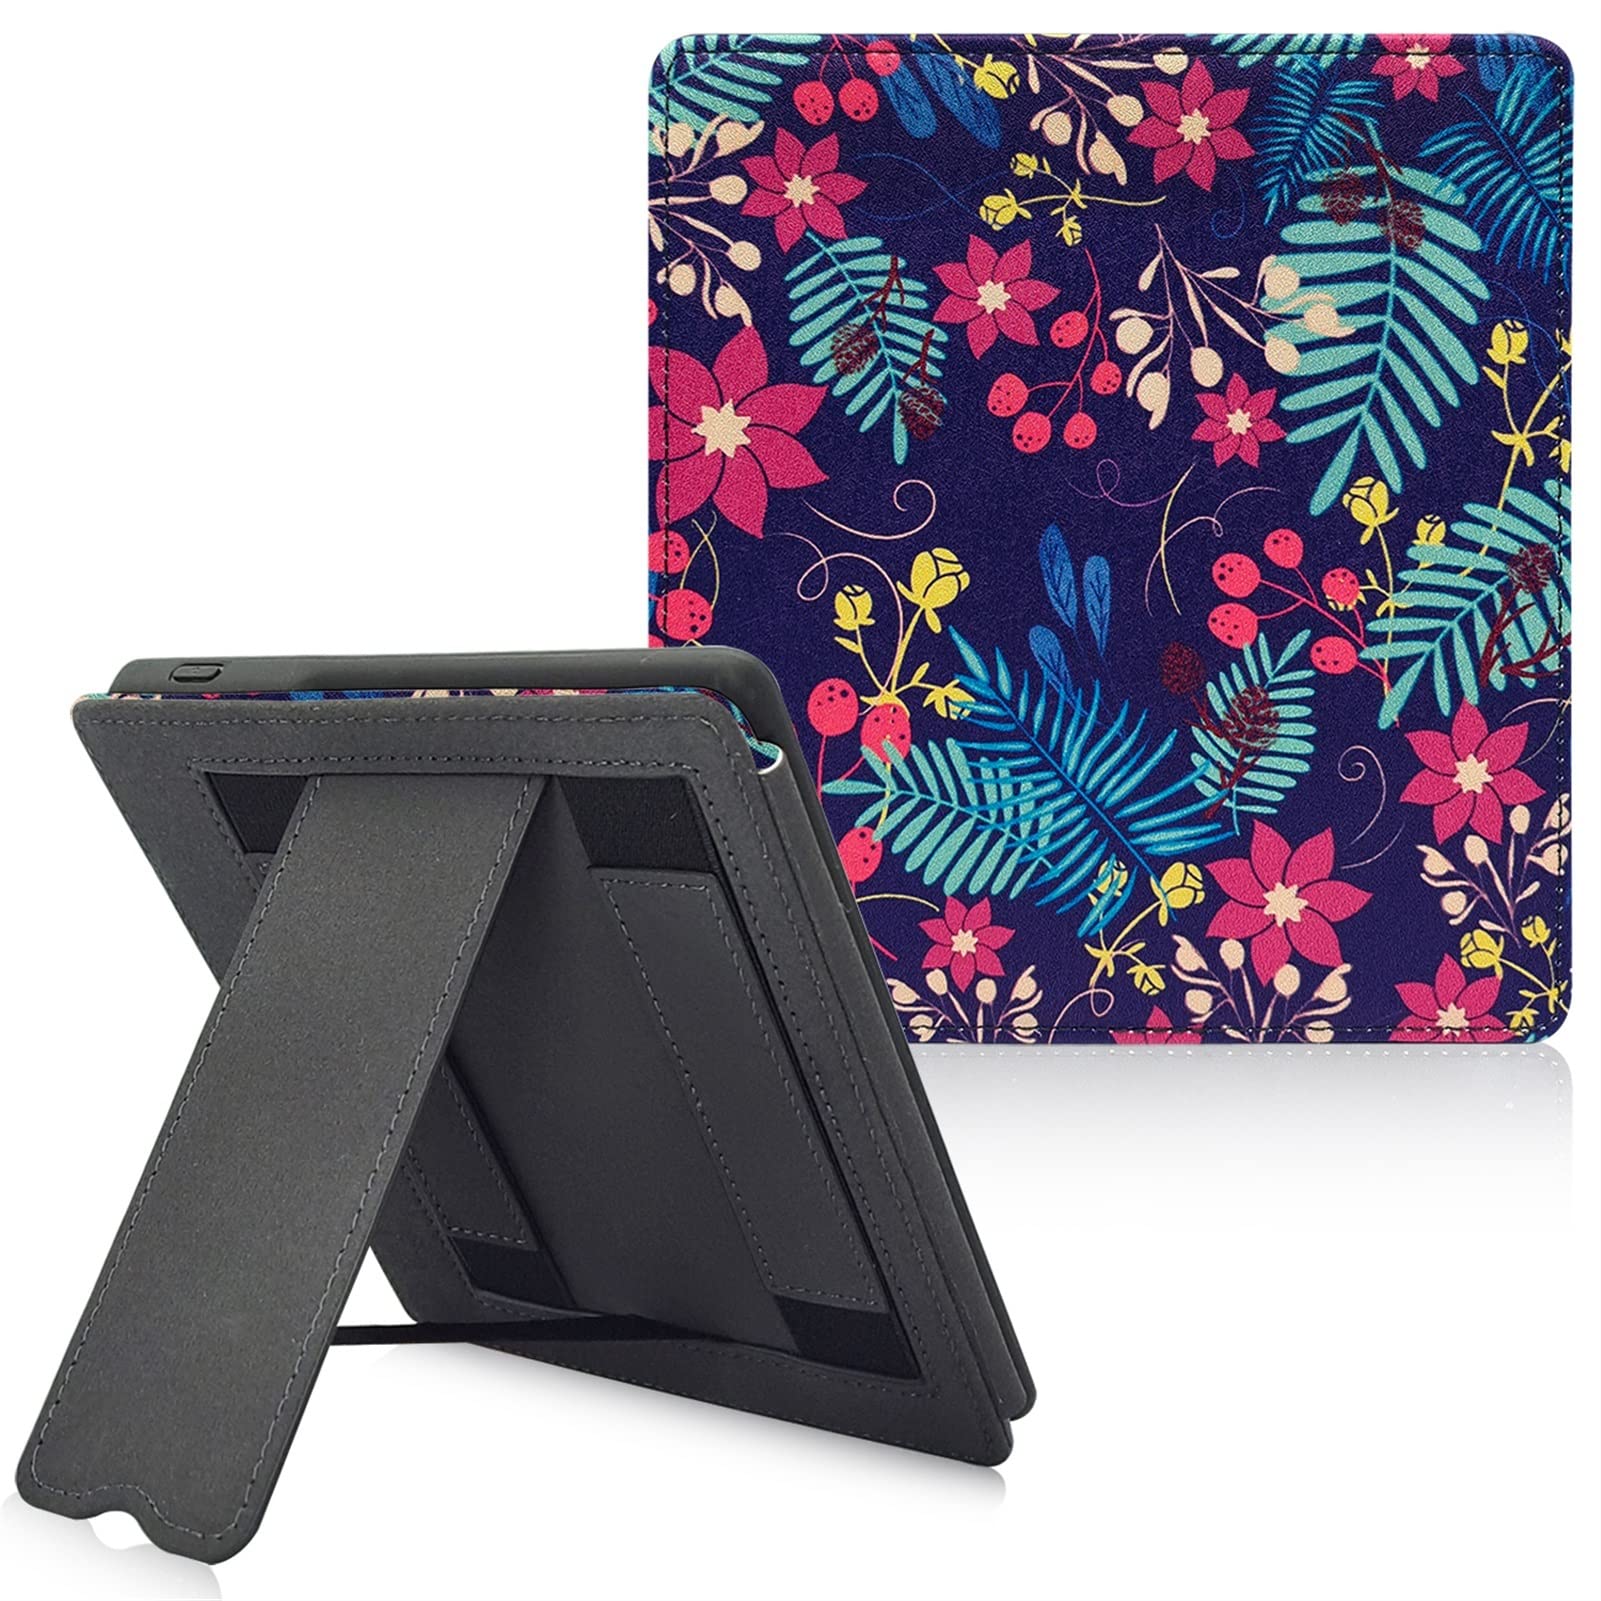 BAIJAC E-Buch Schutzhülle Stand Fall for Kindle Oasis (9./10. Gen, 2017/2019 Release), Deckung for Kindle Oasis 2/3 mit Auto Sleep Wake/Double Hand-Held Schlaf/Wach-Funktion (Color : Flower Cluster)